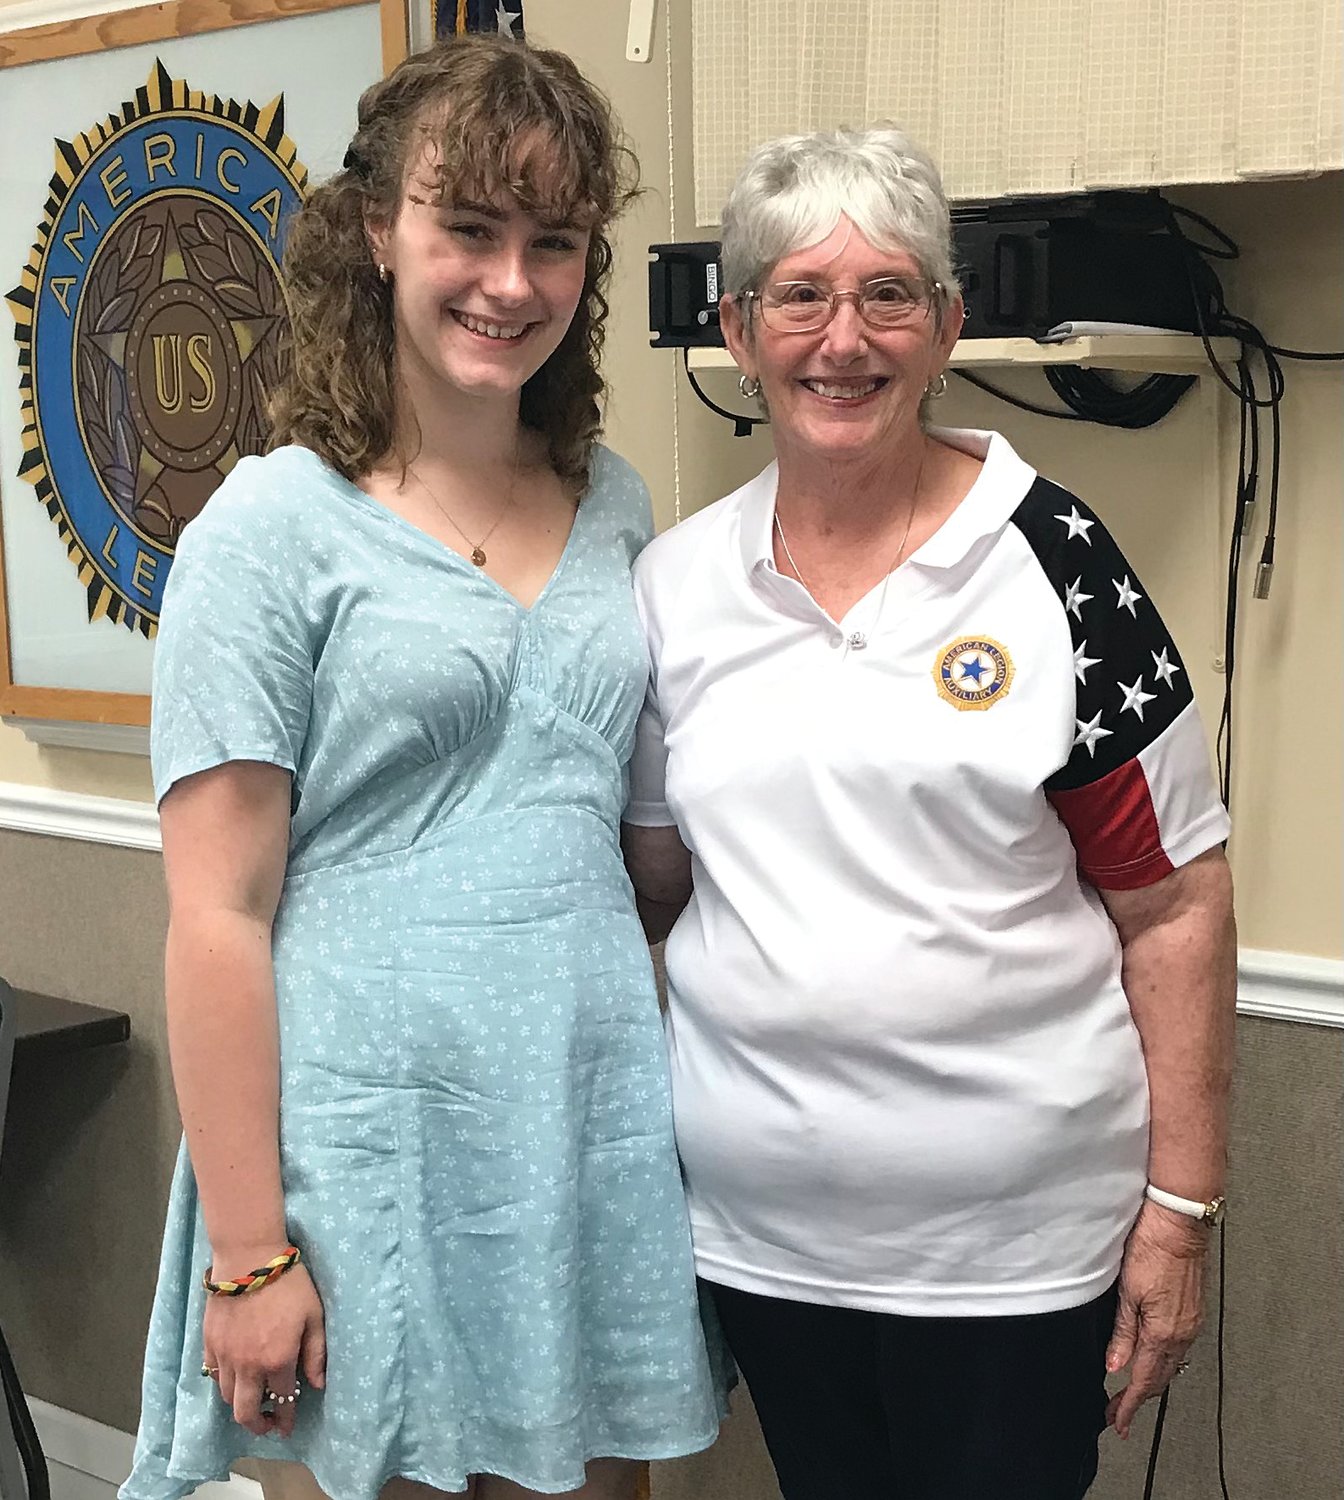 Abigail Eutsler of Linden was welcomed by American Legion Post 72 Commander Bonita Clement during the Auxiliary Academic Gift Recipient Meet & Greet recently. She received a scholarship to attend Butler University where she is pursuing a five-year bachelor of music degree majoring in music education and vocal performance. Eutsler’s grandfathers were Legionnaires. Her maternal grandfather also served as Dubois County Veterans Service Officer and her paternal great grandfather played euphonium in the U.S. Army Bands. Eutsler has served as Page to former Lieutenant Governors and Indiana Senate Presidents Becky Skillman and Sue Ellspermann and State Representative Sheila Klinker.  She has attended the 56th, 57th and 58th Presidential Inaugurals activities of the Joint Congressional Committee on Inaugural Ceremonies, Presidential Inaugural Committees, and Indiana Society of Washington, DC. She was also selected as a delegate to the National Rural Electric Cooperative Association Youth Tour to Washington, D.C.